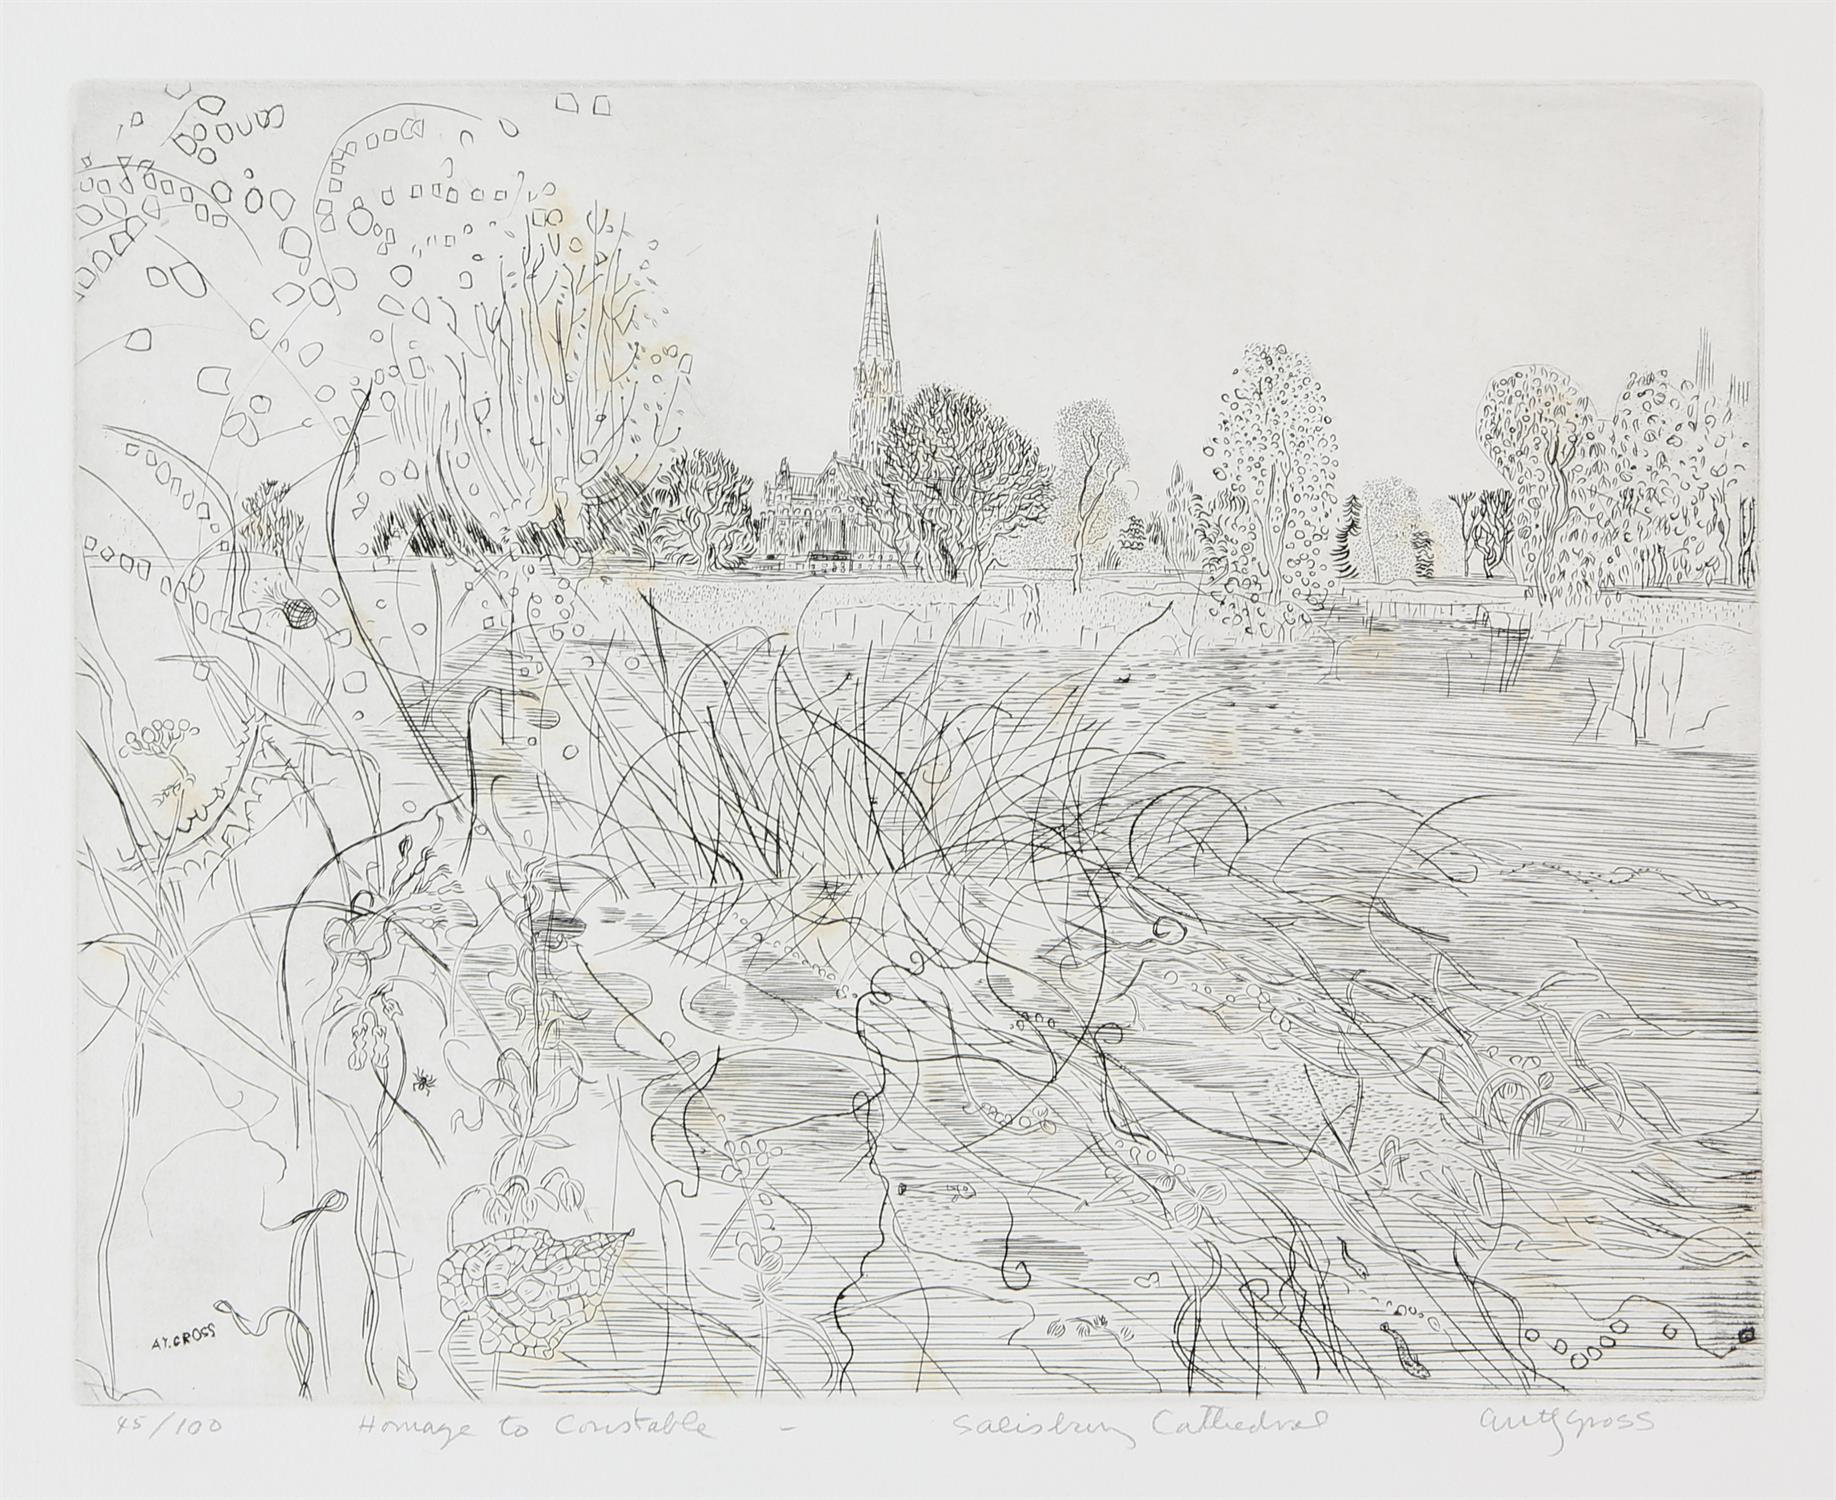 † Anthony Gross RA (British, 1905-1984). Homage to Constable - Salisbury Cathedral, etching,